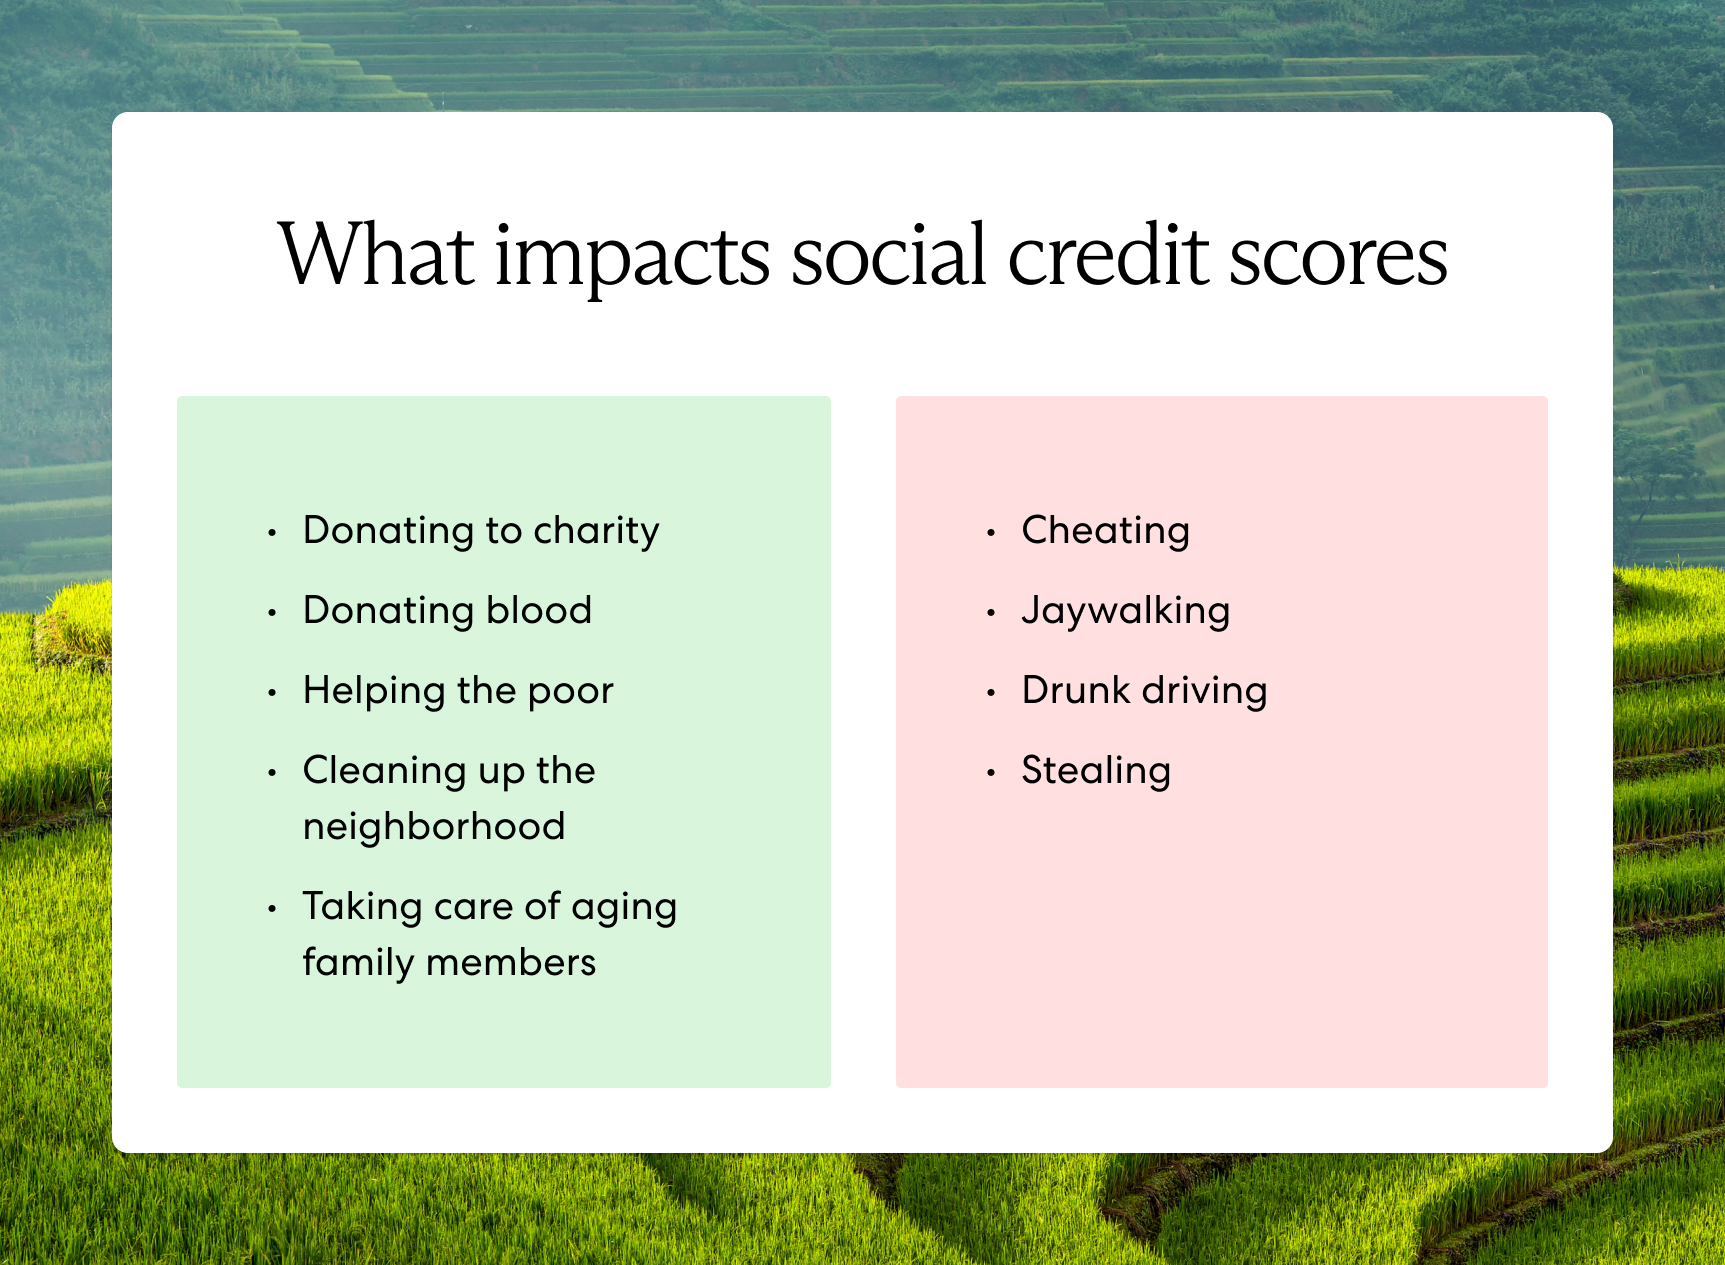 Positive actions like donating to charity improve one's social credit score in China, while negative actions like stealing degrade the score